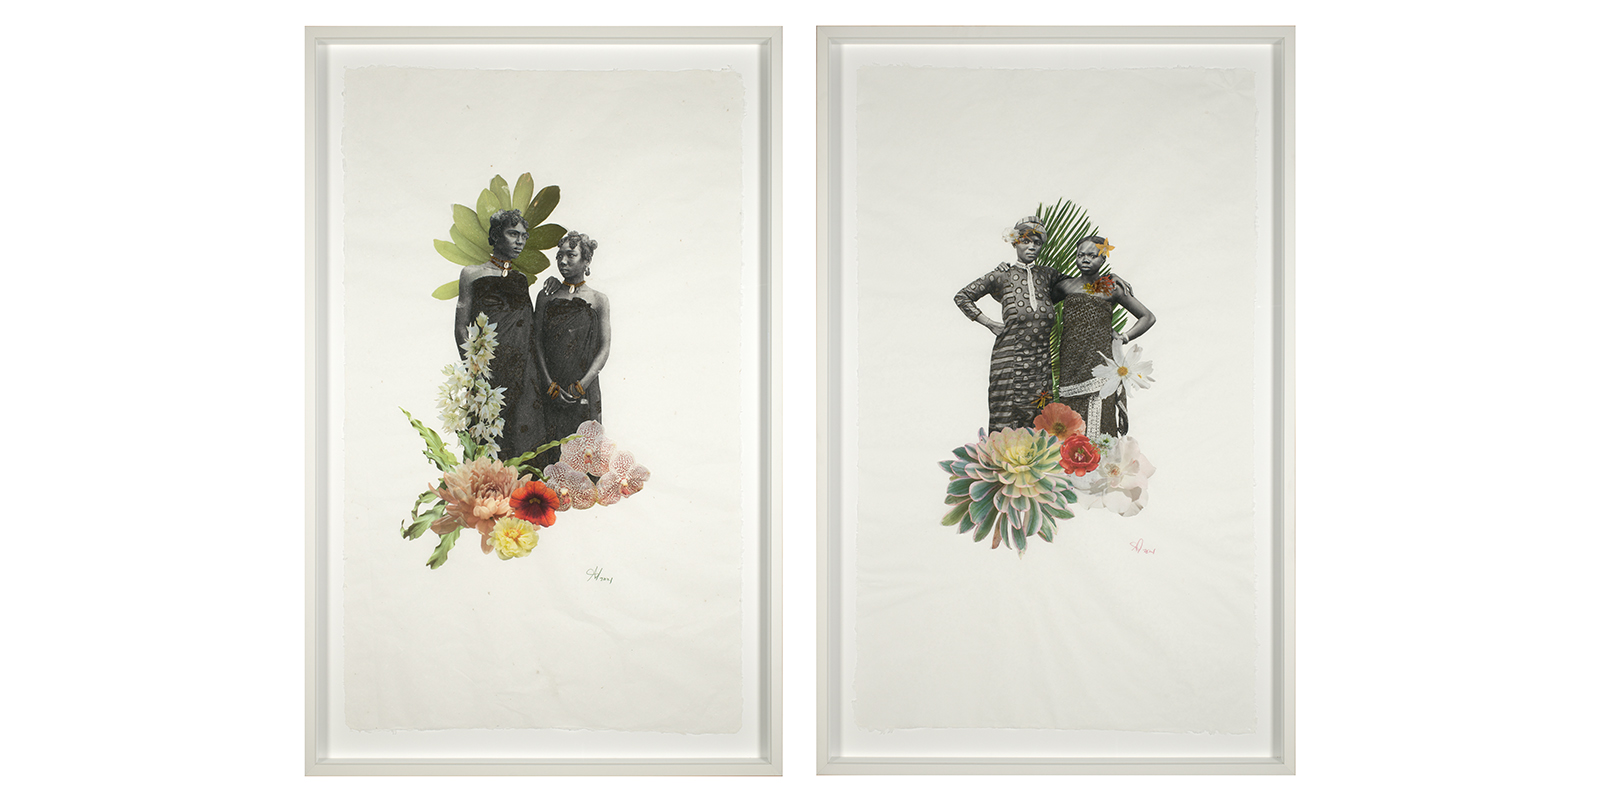 Two part collage, each collage shows two women in dresses standing side by side with flowers behind and in front of the them.